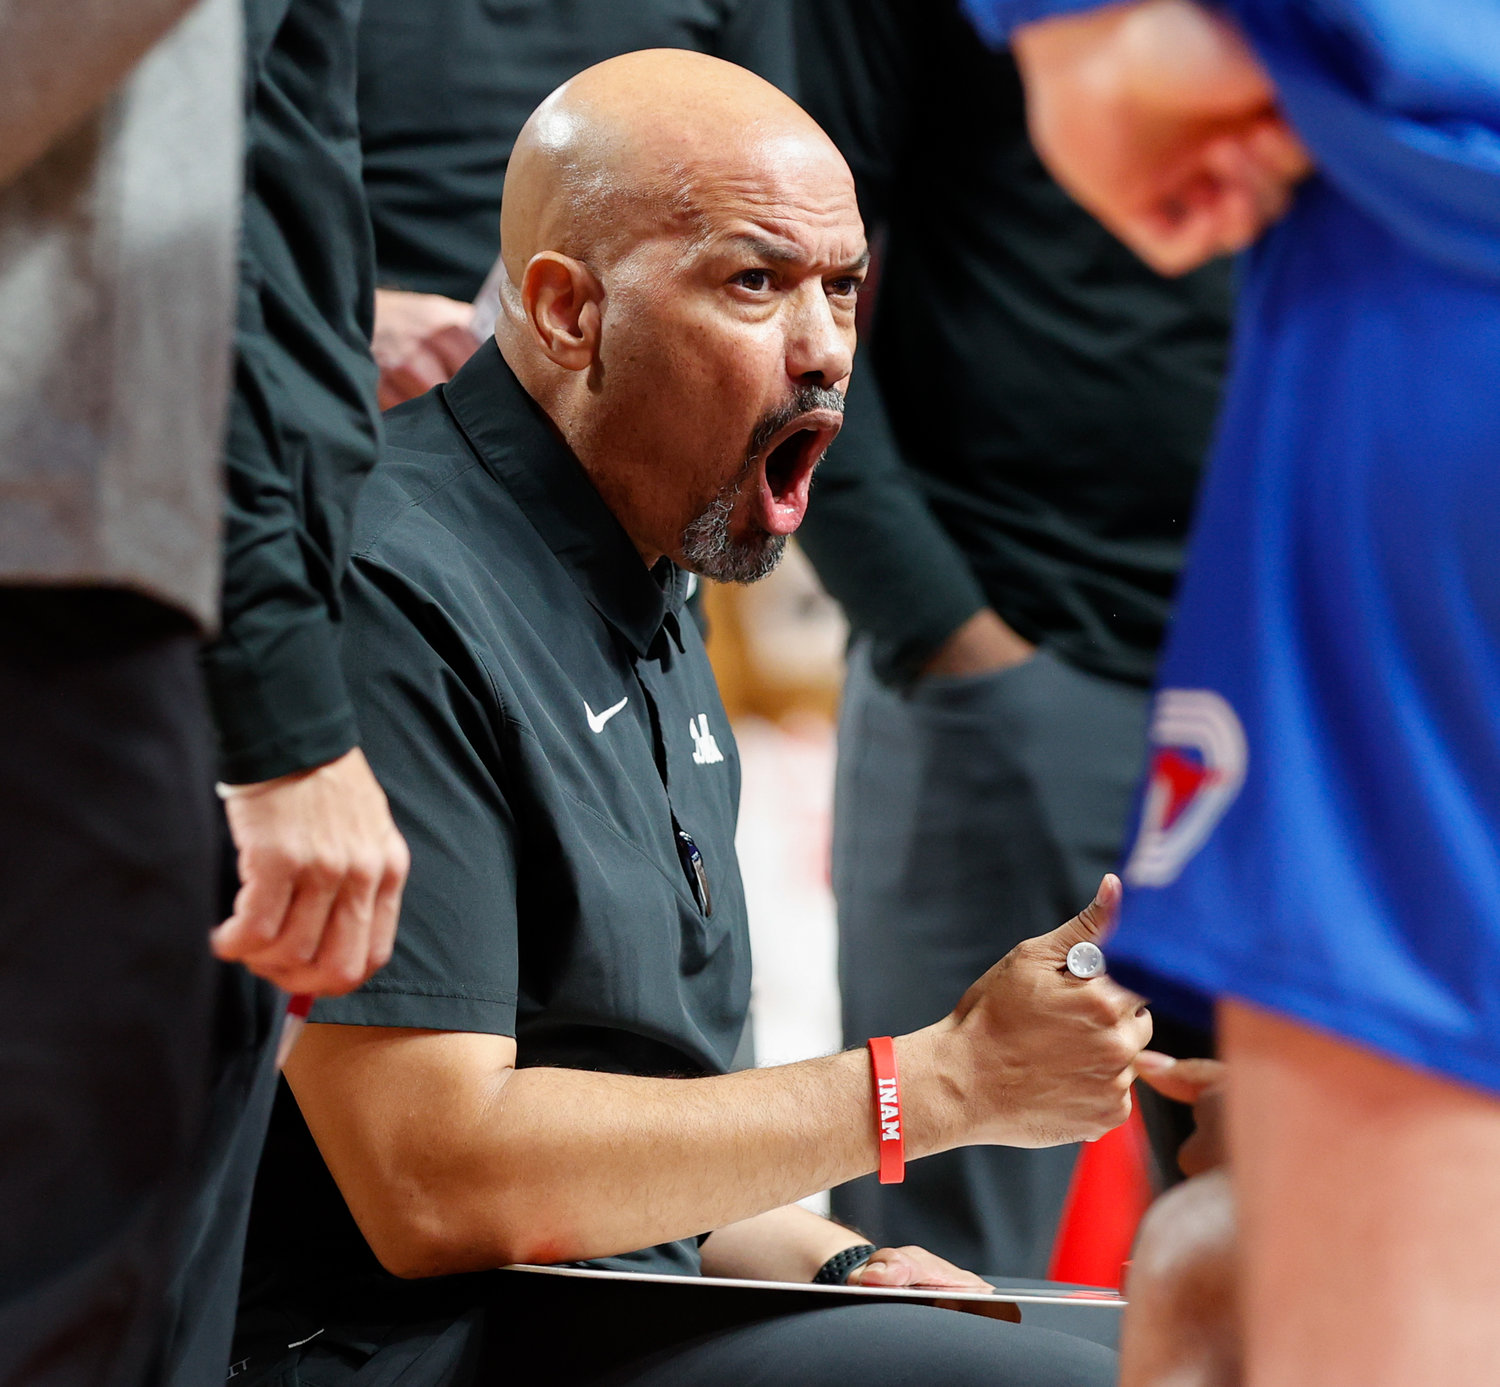 SMU head coach Rob Lanier talks with his team during a timeout during an NCAA men’s basketball game between the Houston Cougars and the Southern Methodist Mustangs on Jan. 5, 2023 in Houston. Houston won, 87-53,